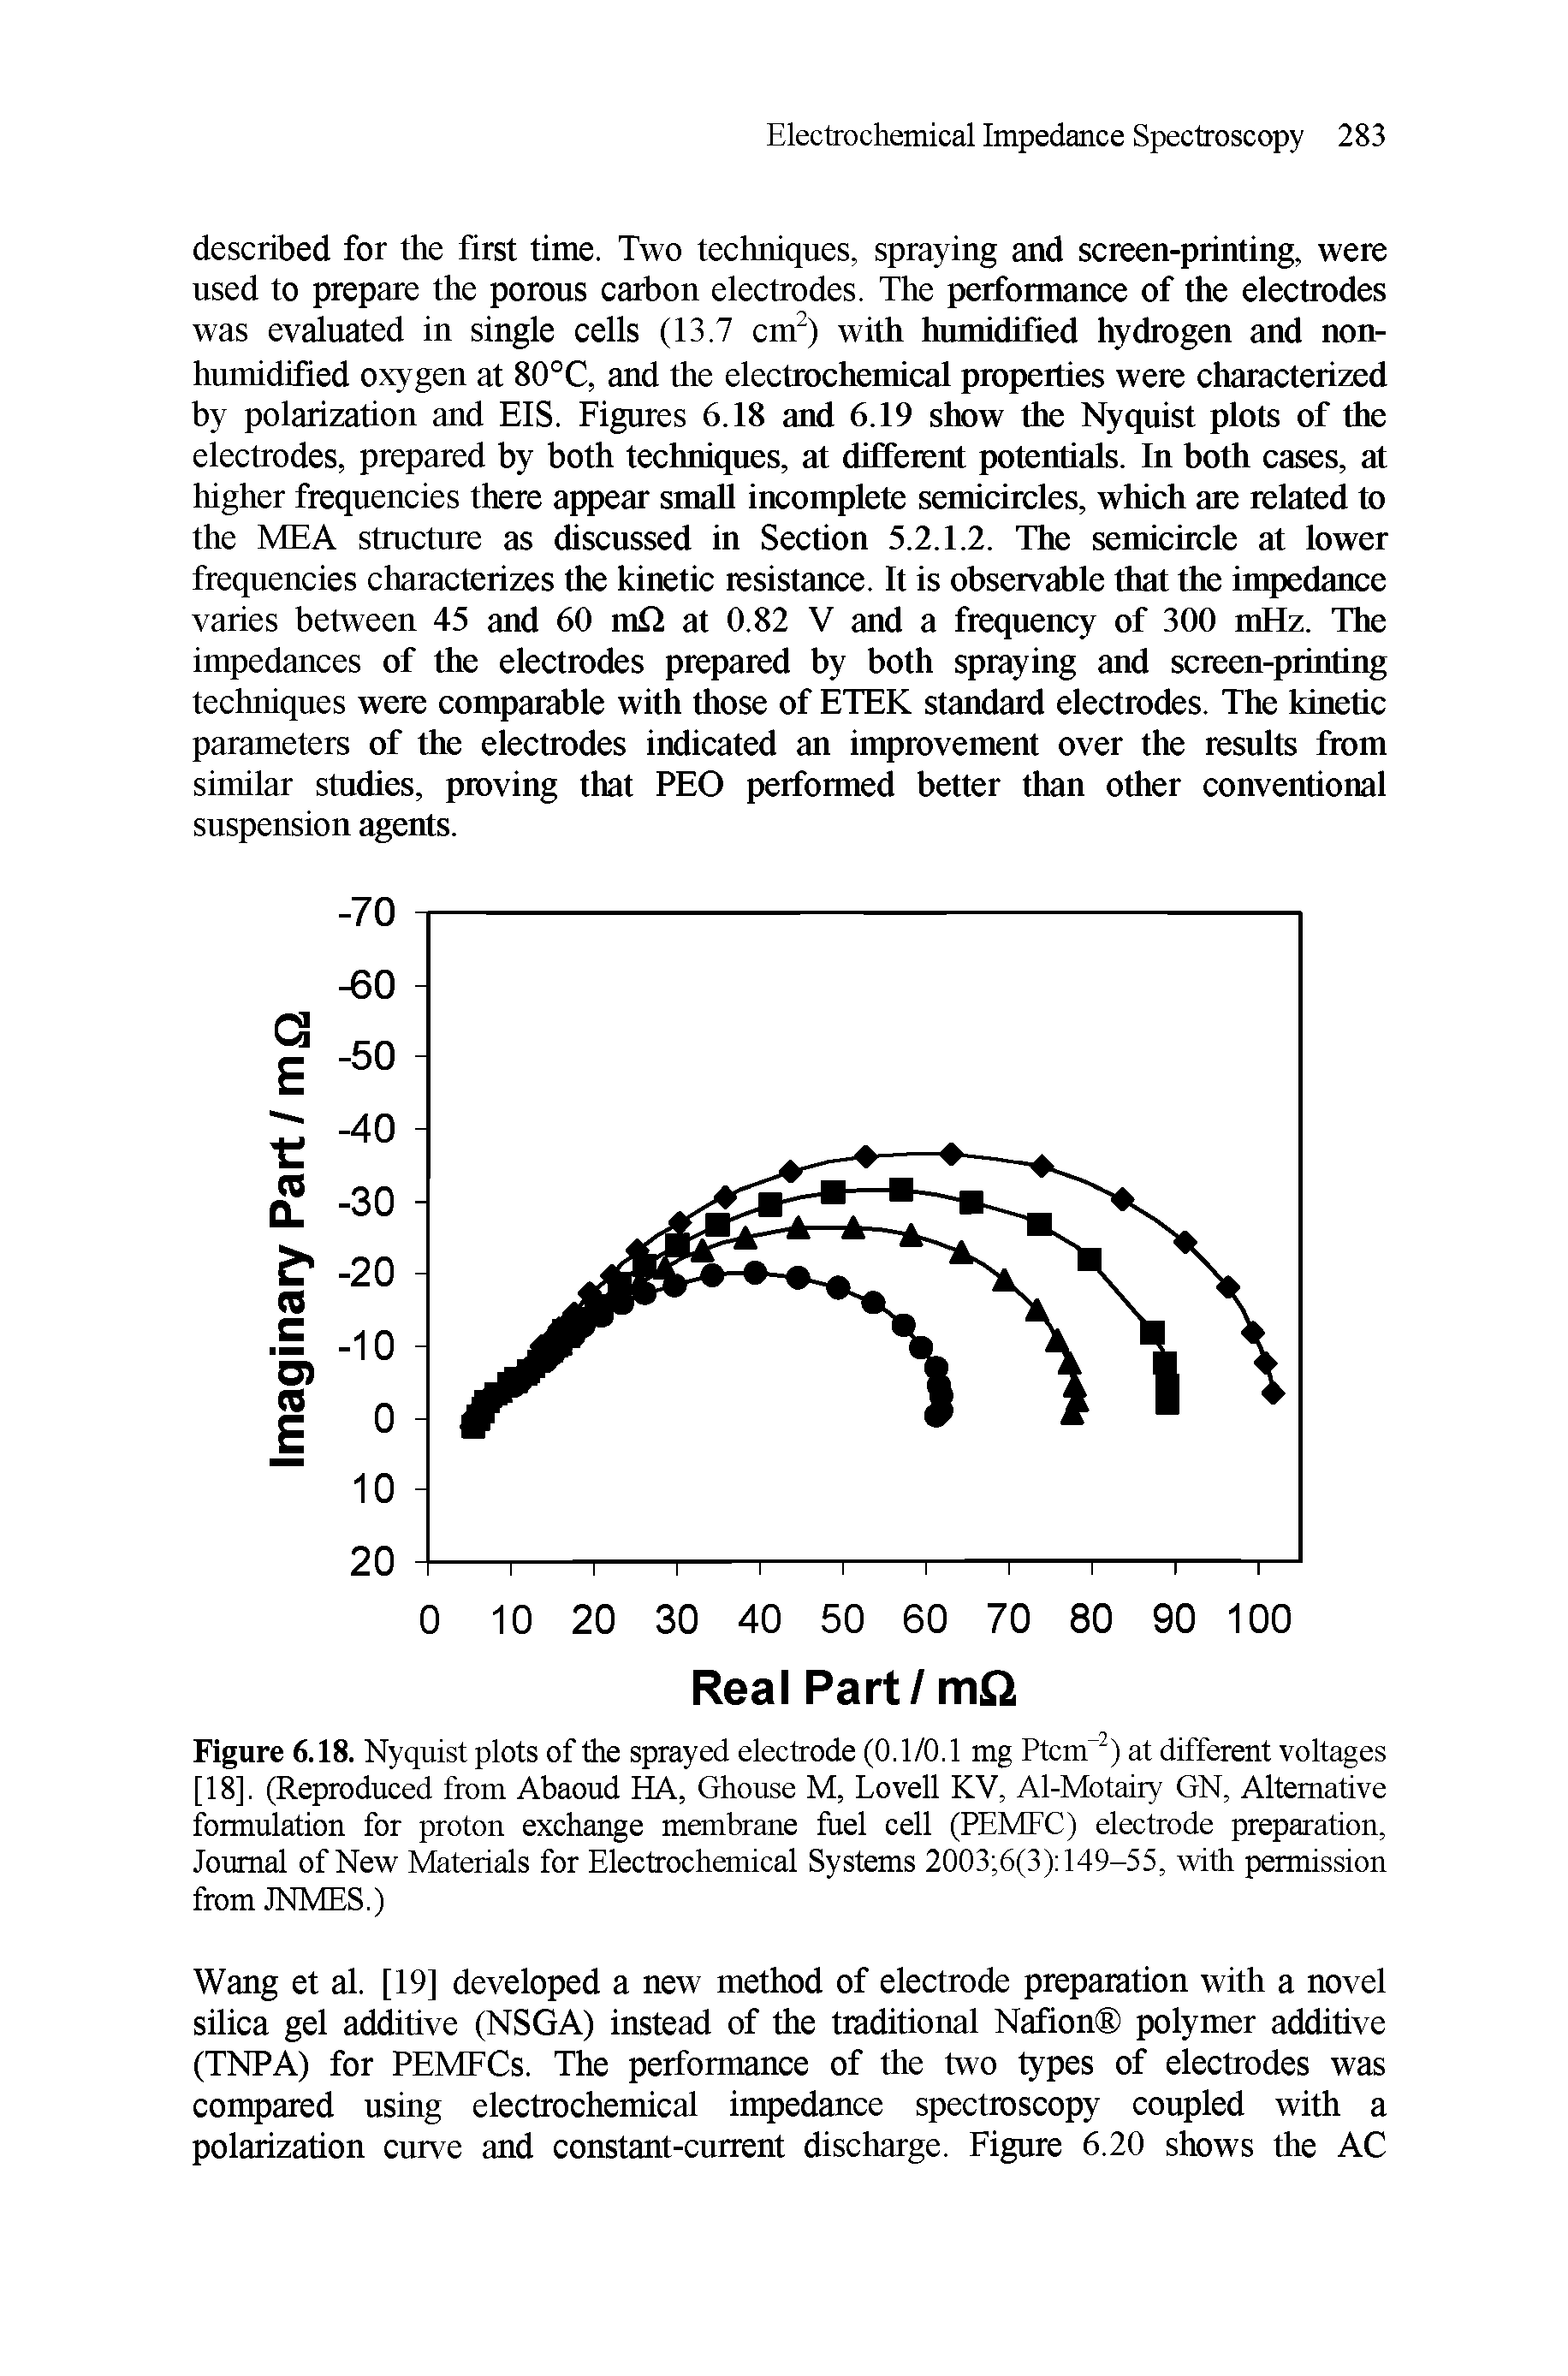 Figure 6.18. Nyquist plots of the sprayed electrode (0.1/0.1 mg Ptcnf2) at different voltages [18], (Reproduced from Abaoud HA, Ghouse M, Lovell KV, Al-Motairy GN, Alternative formulation for proton exchange membrane fuel cell (PEMFC) electrode preparation, Journal of New Materials for Electrochemical Systems 2003 6(3) 149-55, with permission from JNMES.)...